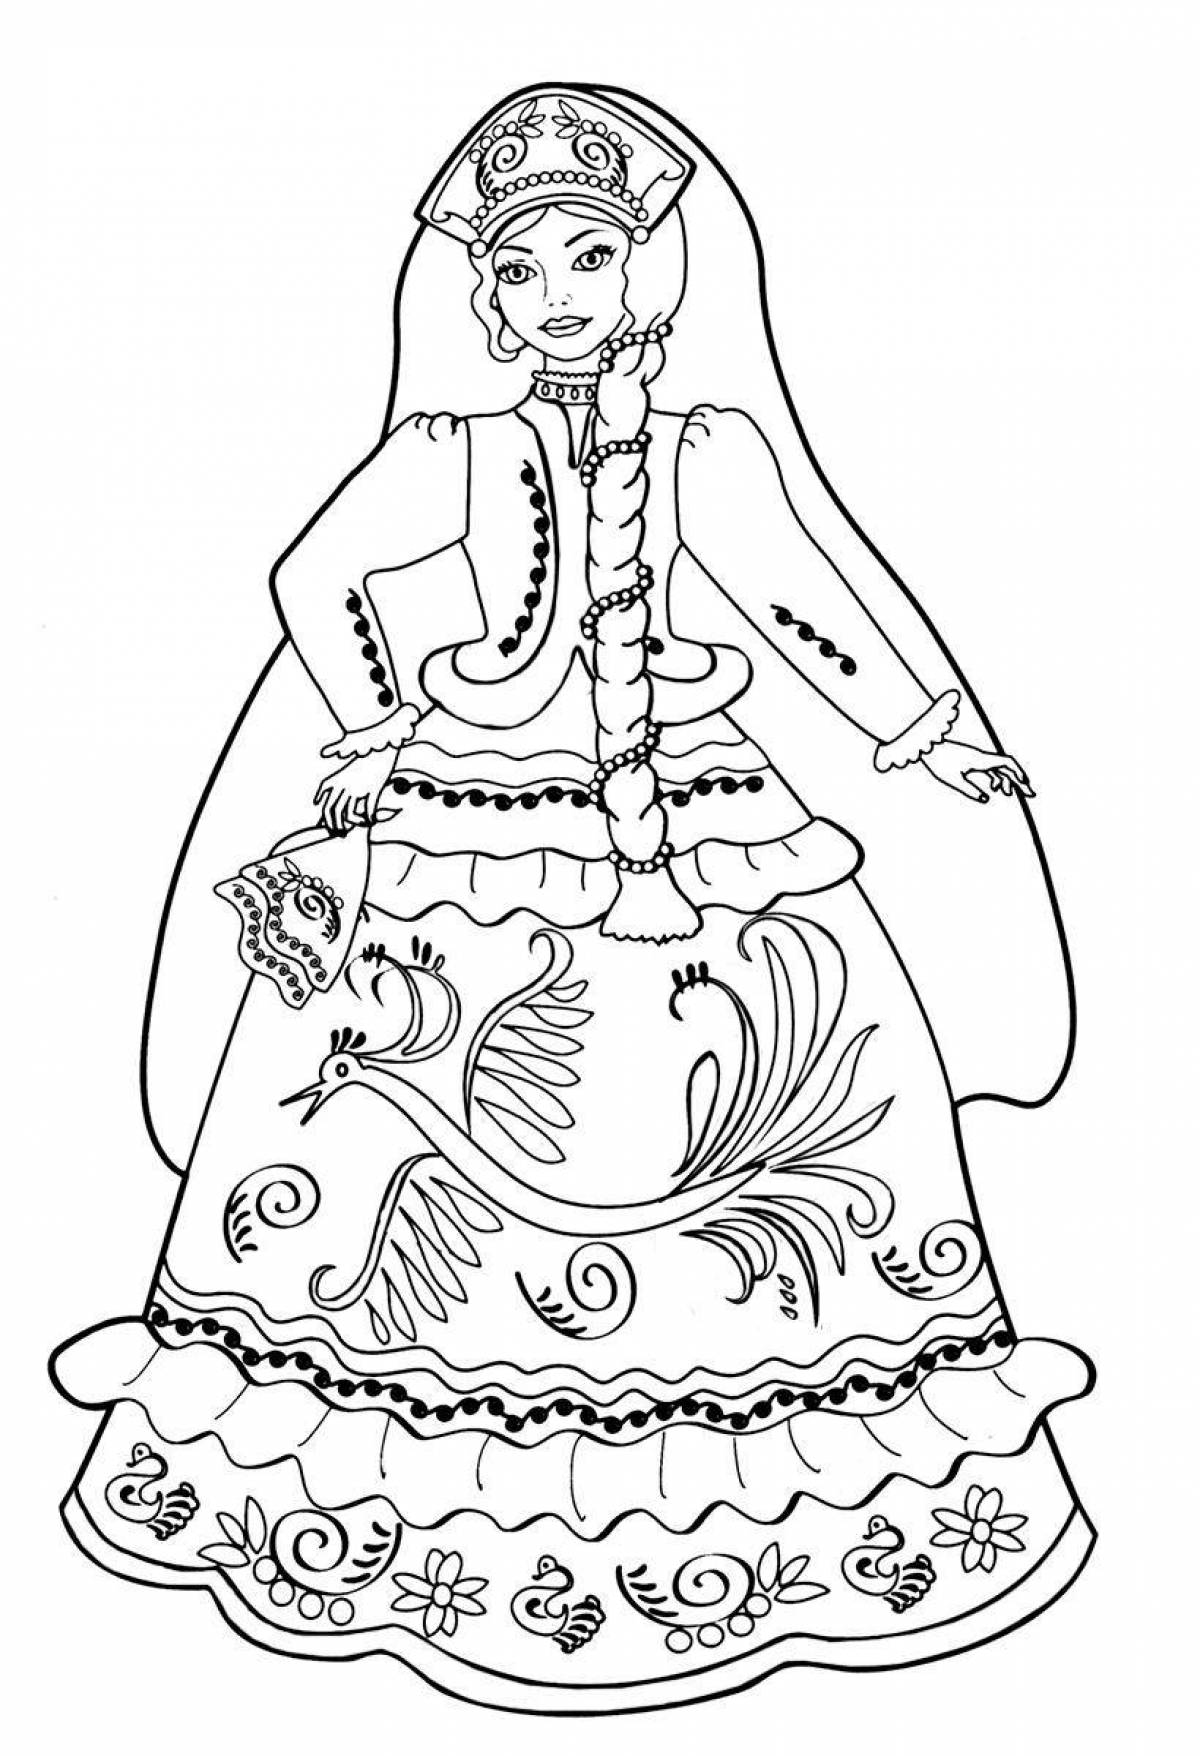 Coloring page wild Russian beauty